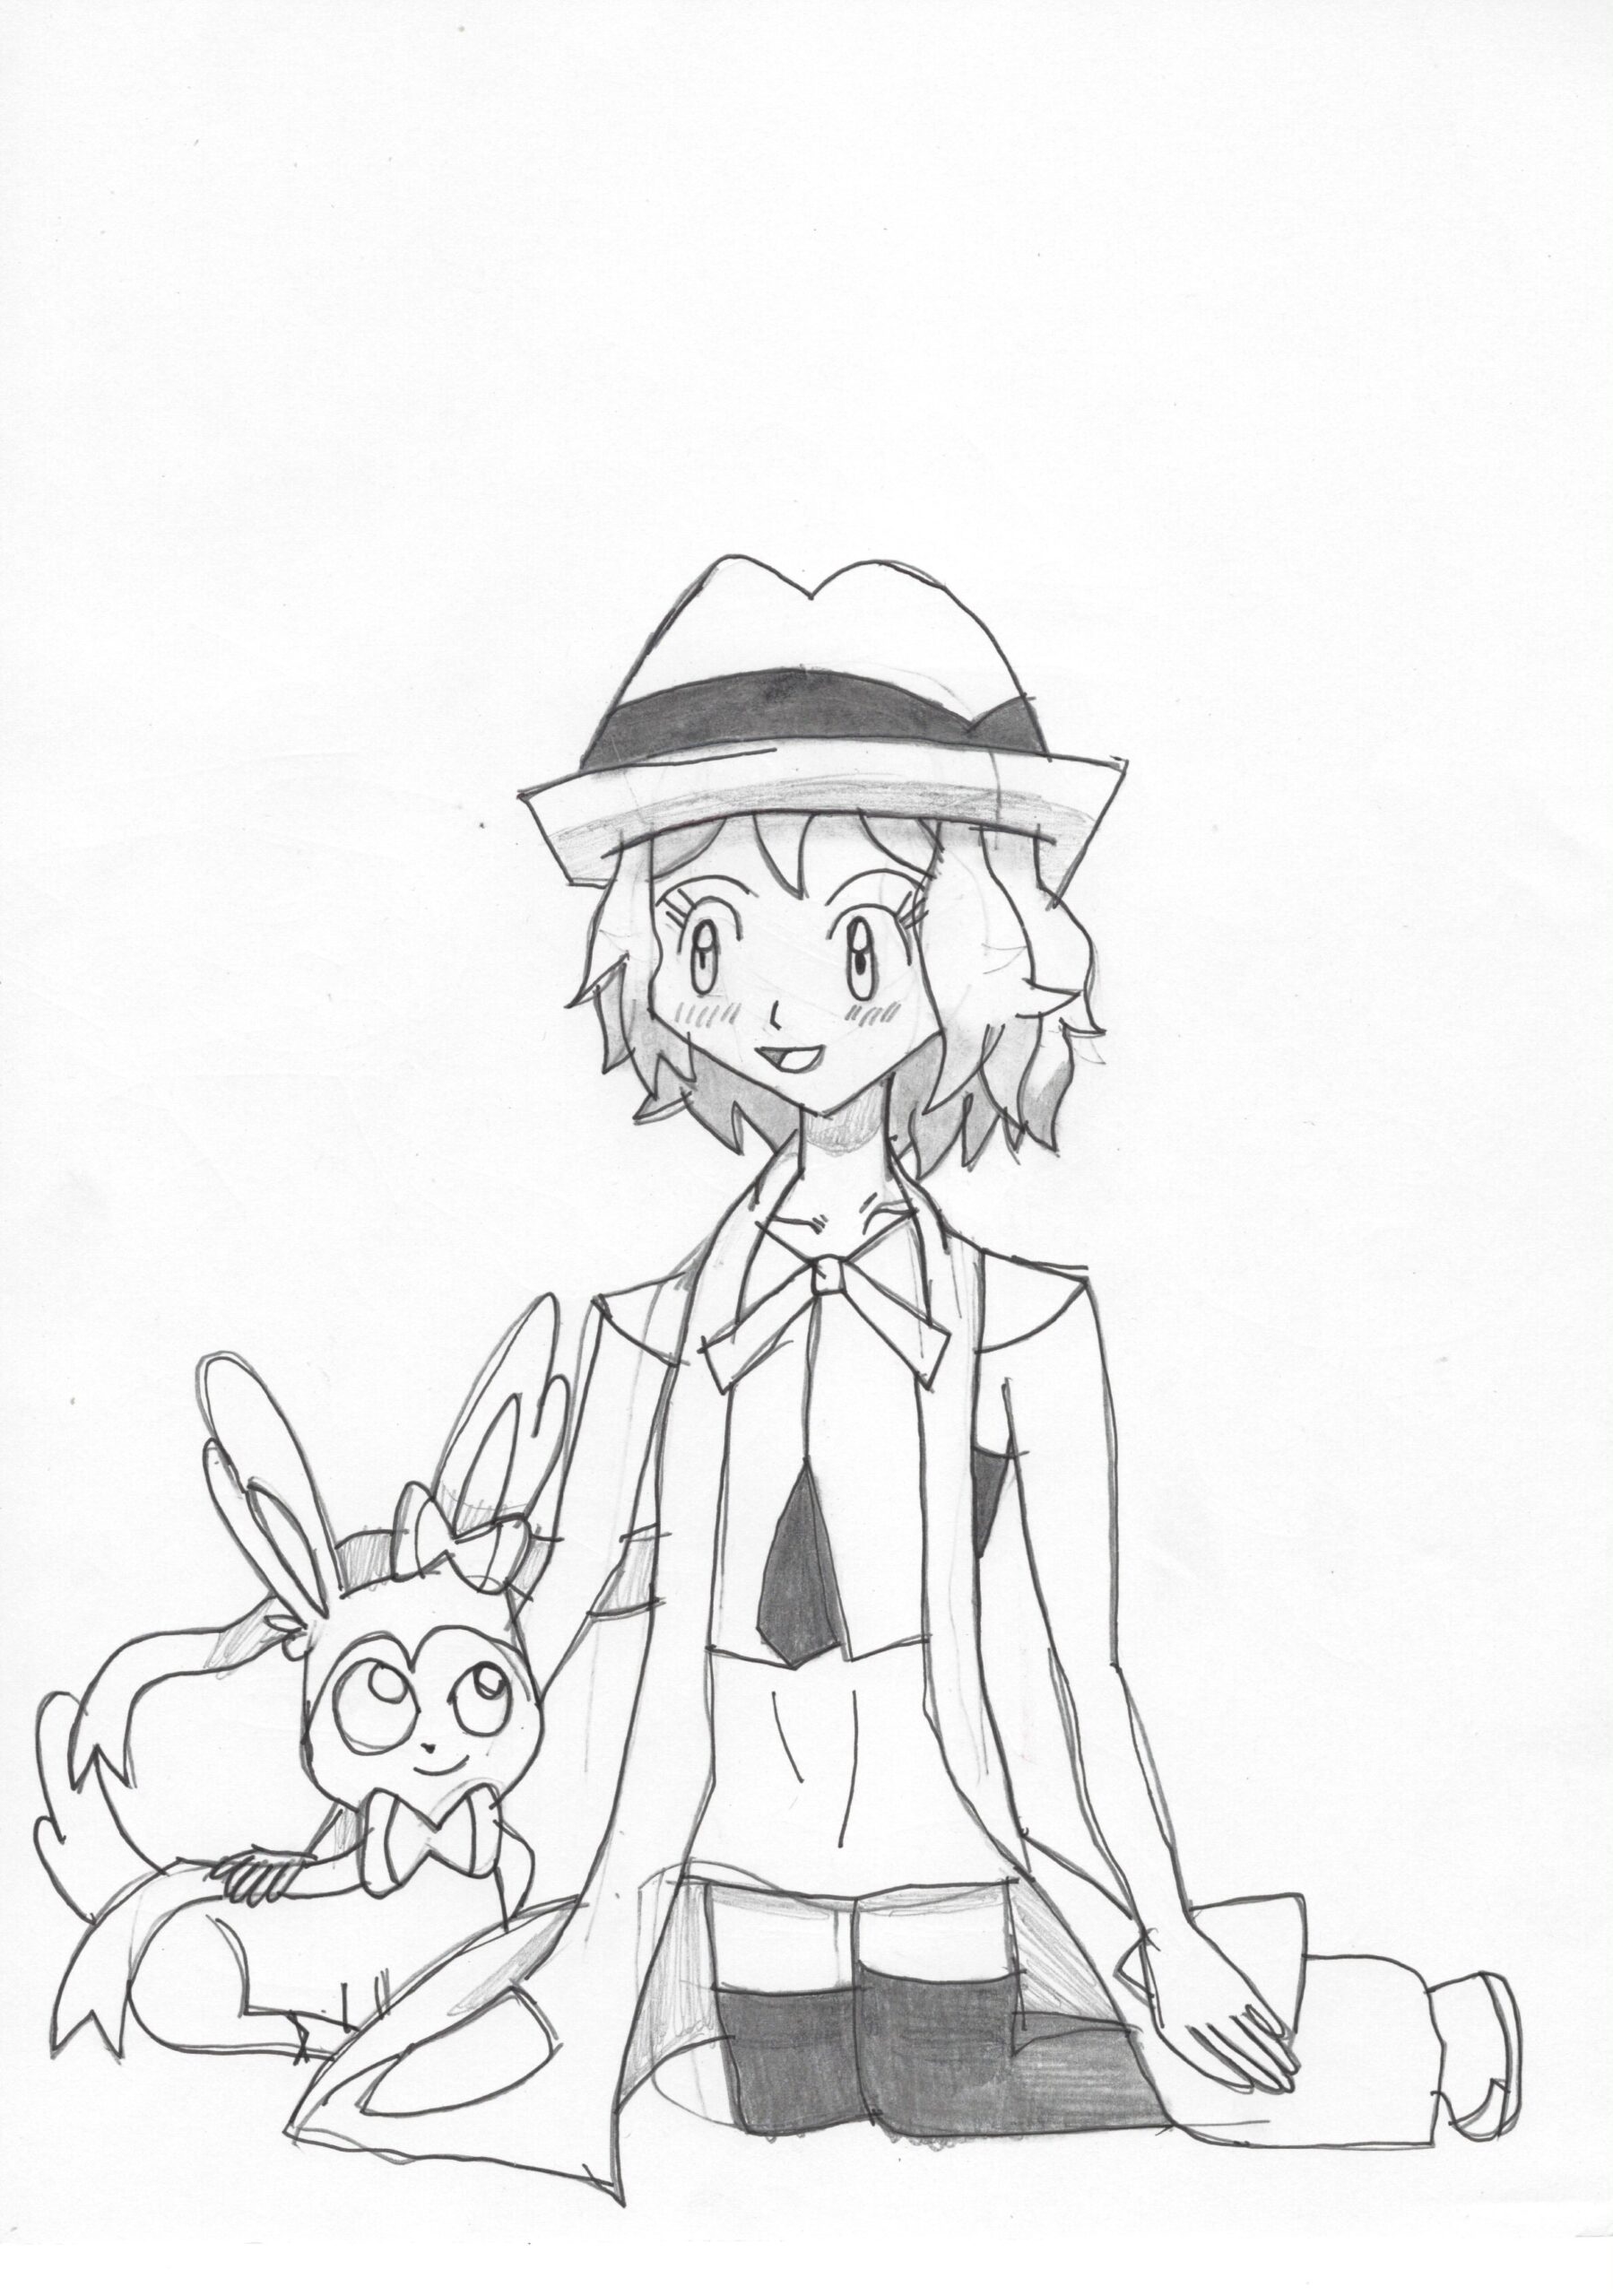 sylveon and serena coloring pages